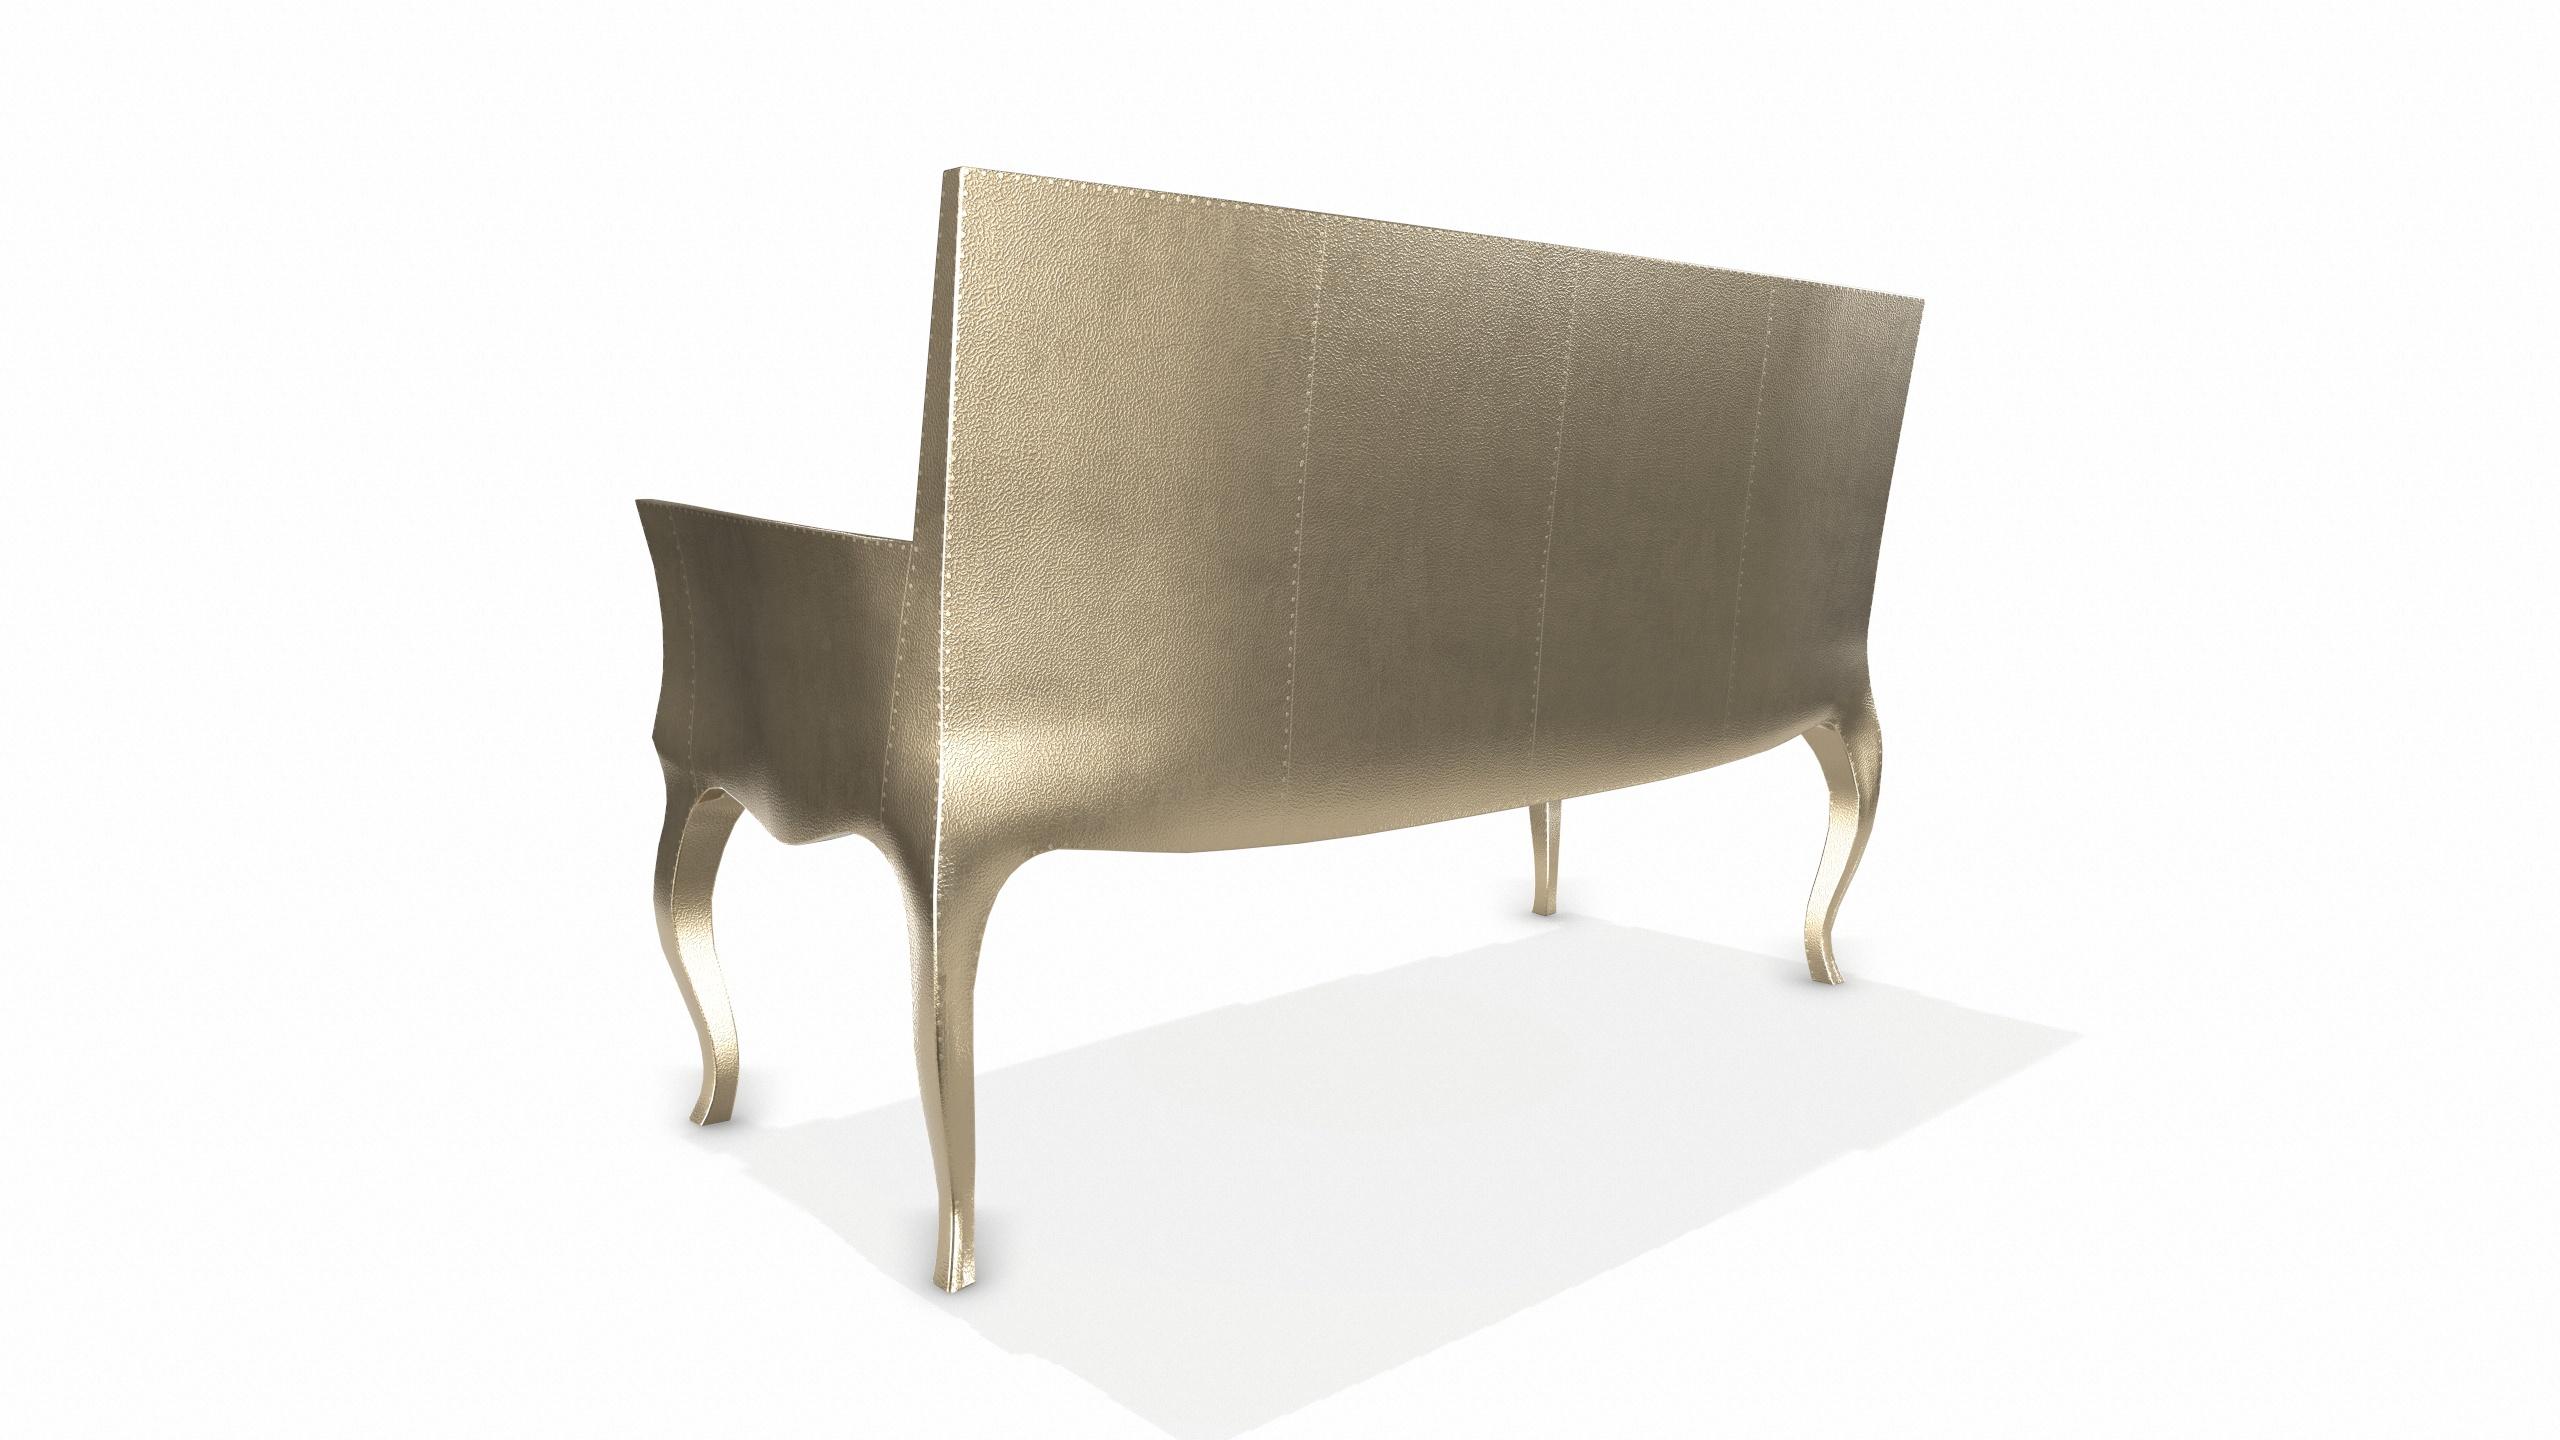 Other Louise Settee Art Deco Canapes in Fine Hammered Brass by Paul Mathieu For Sale